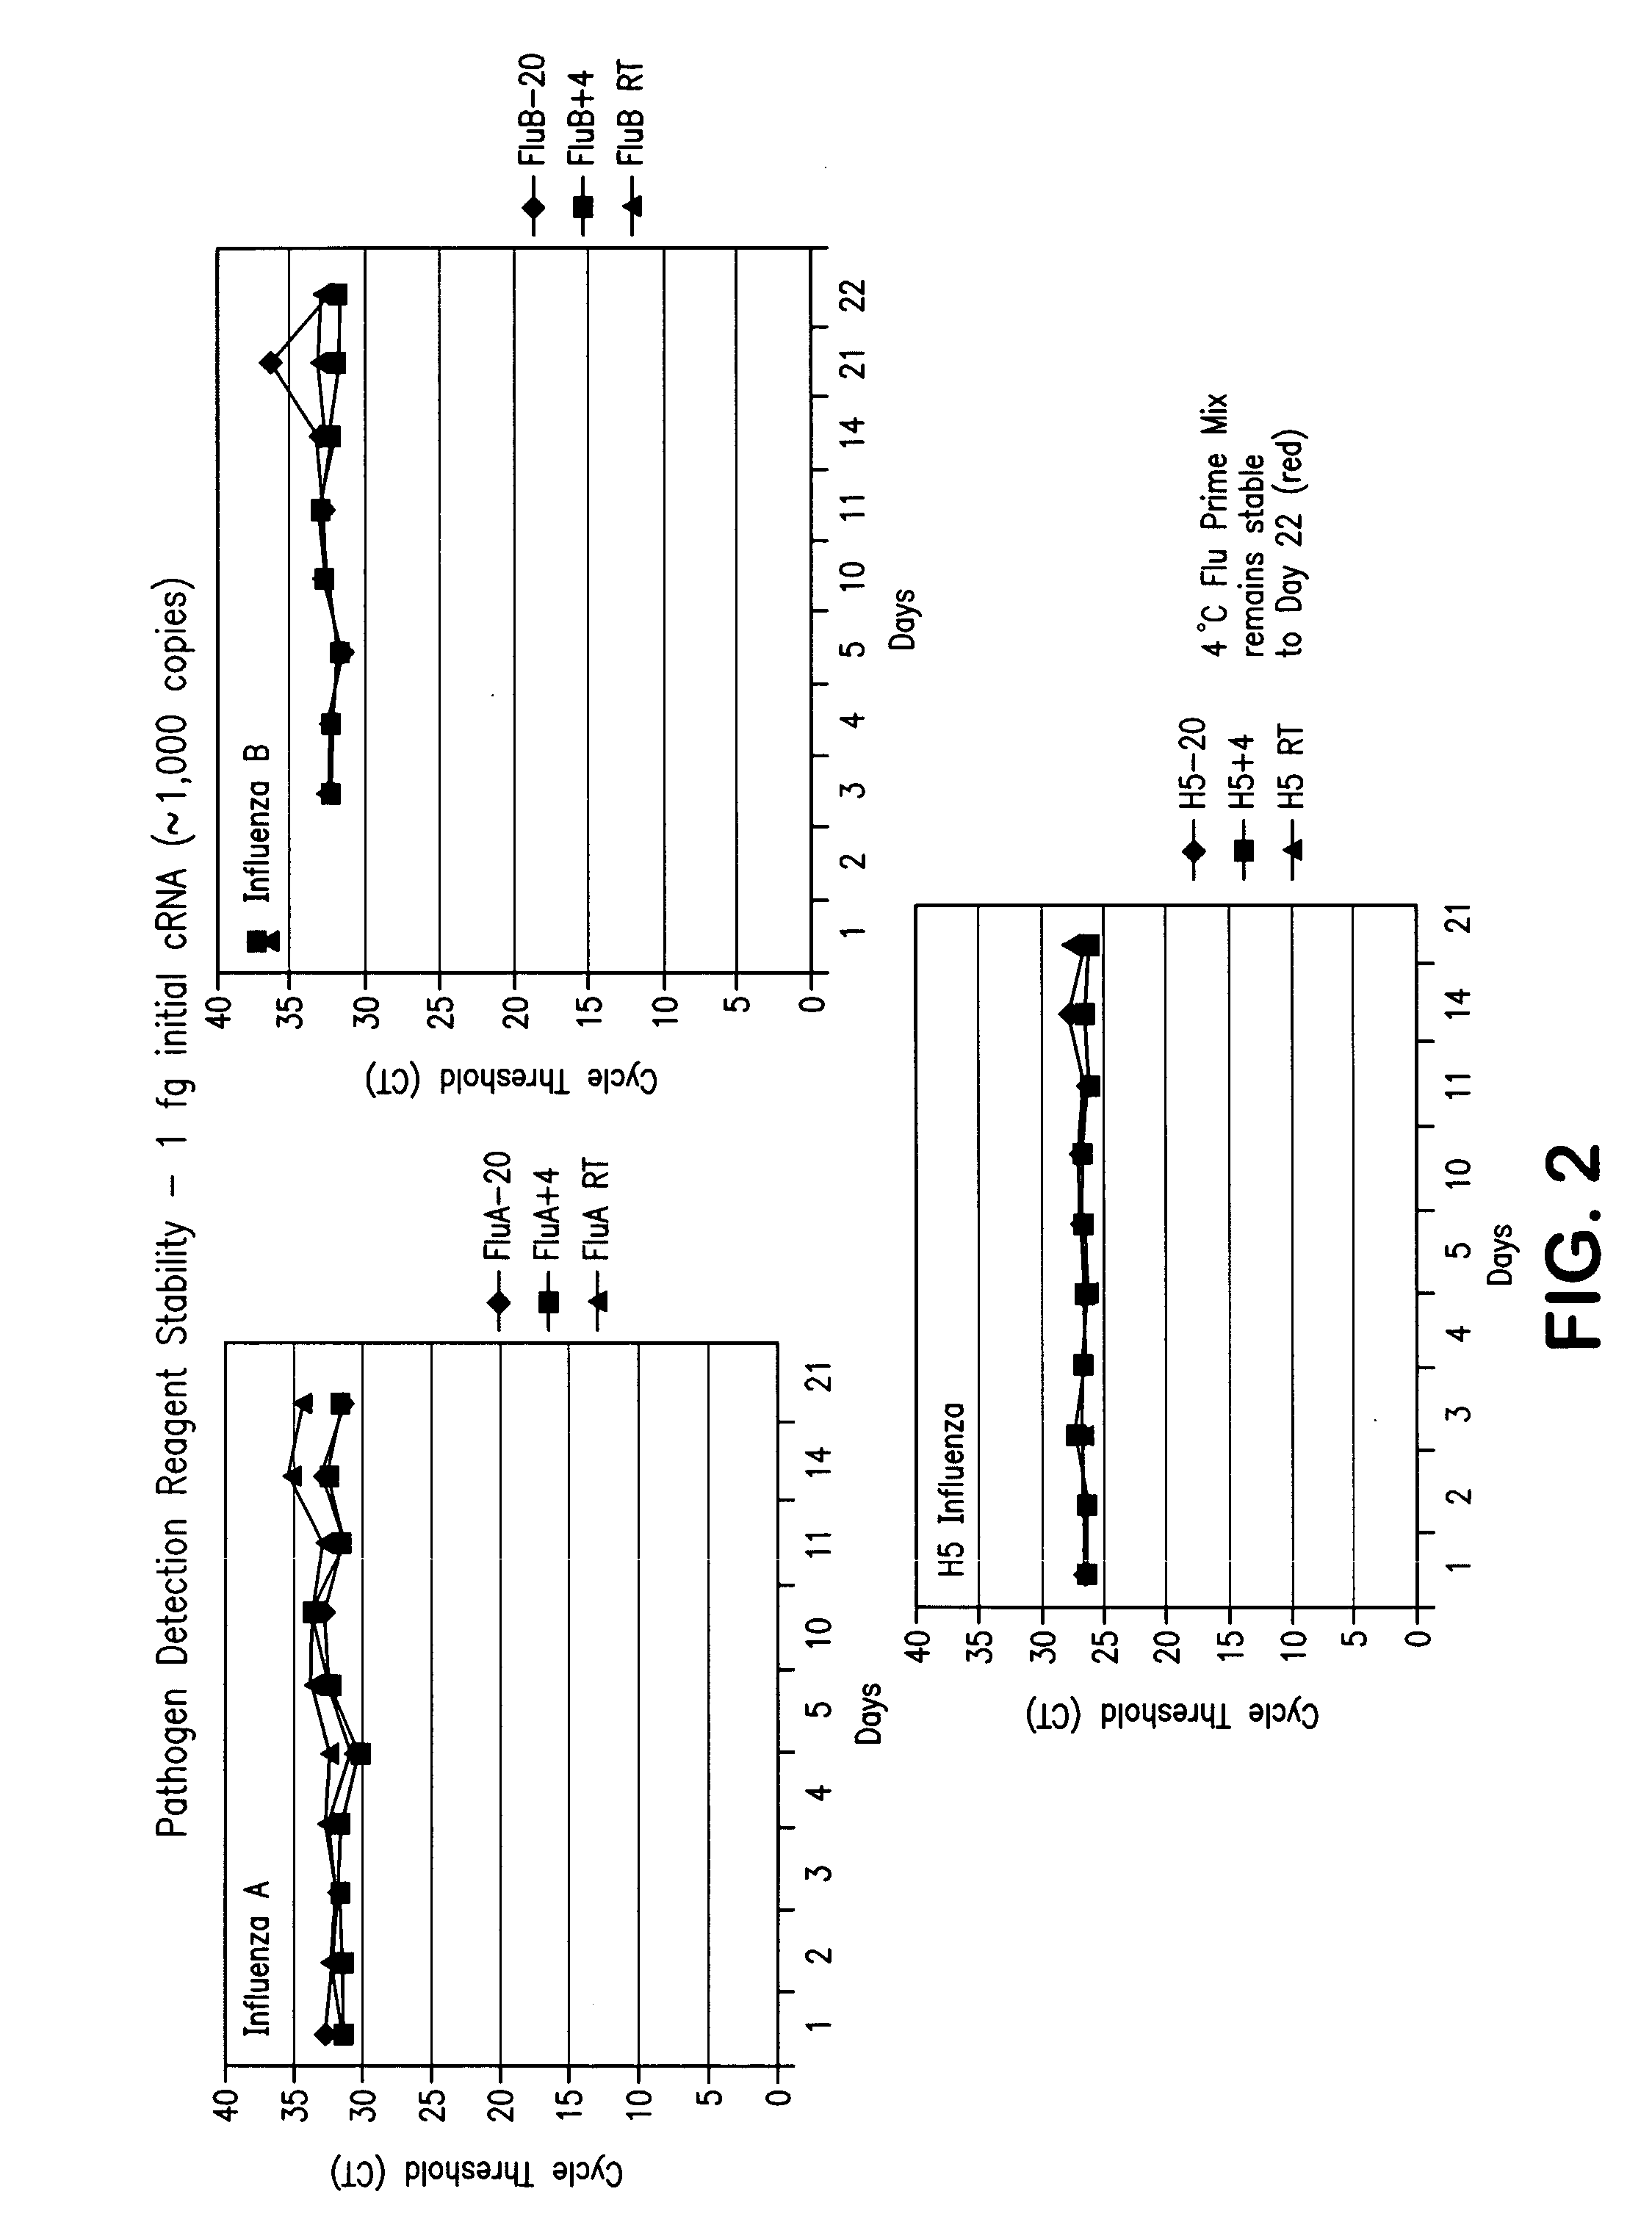 Biological organism identification product and methods